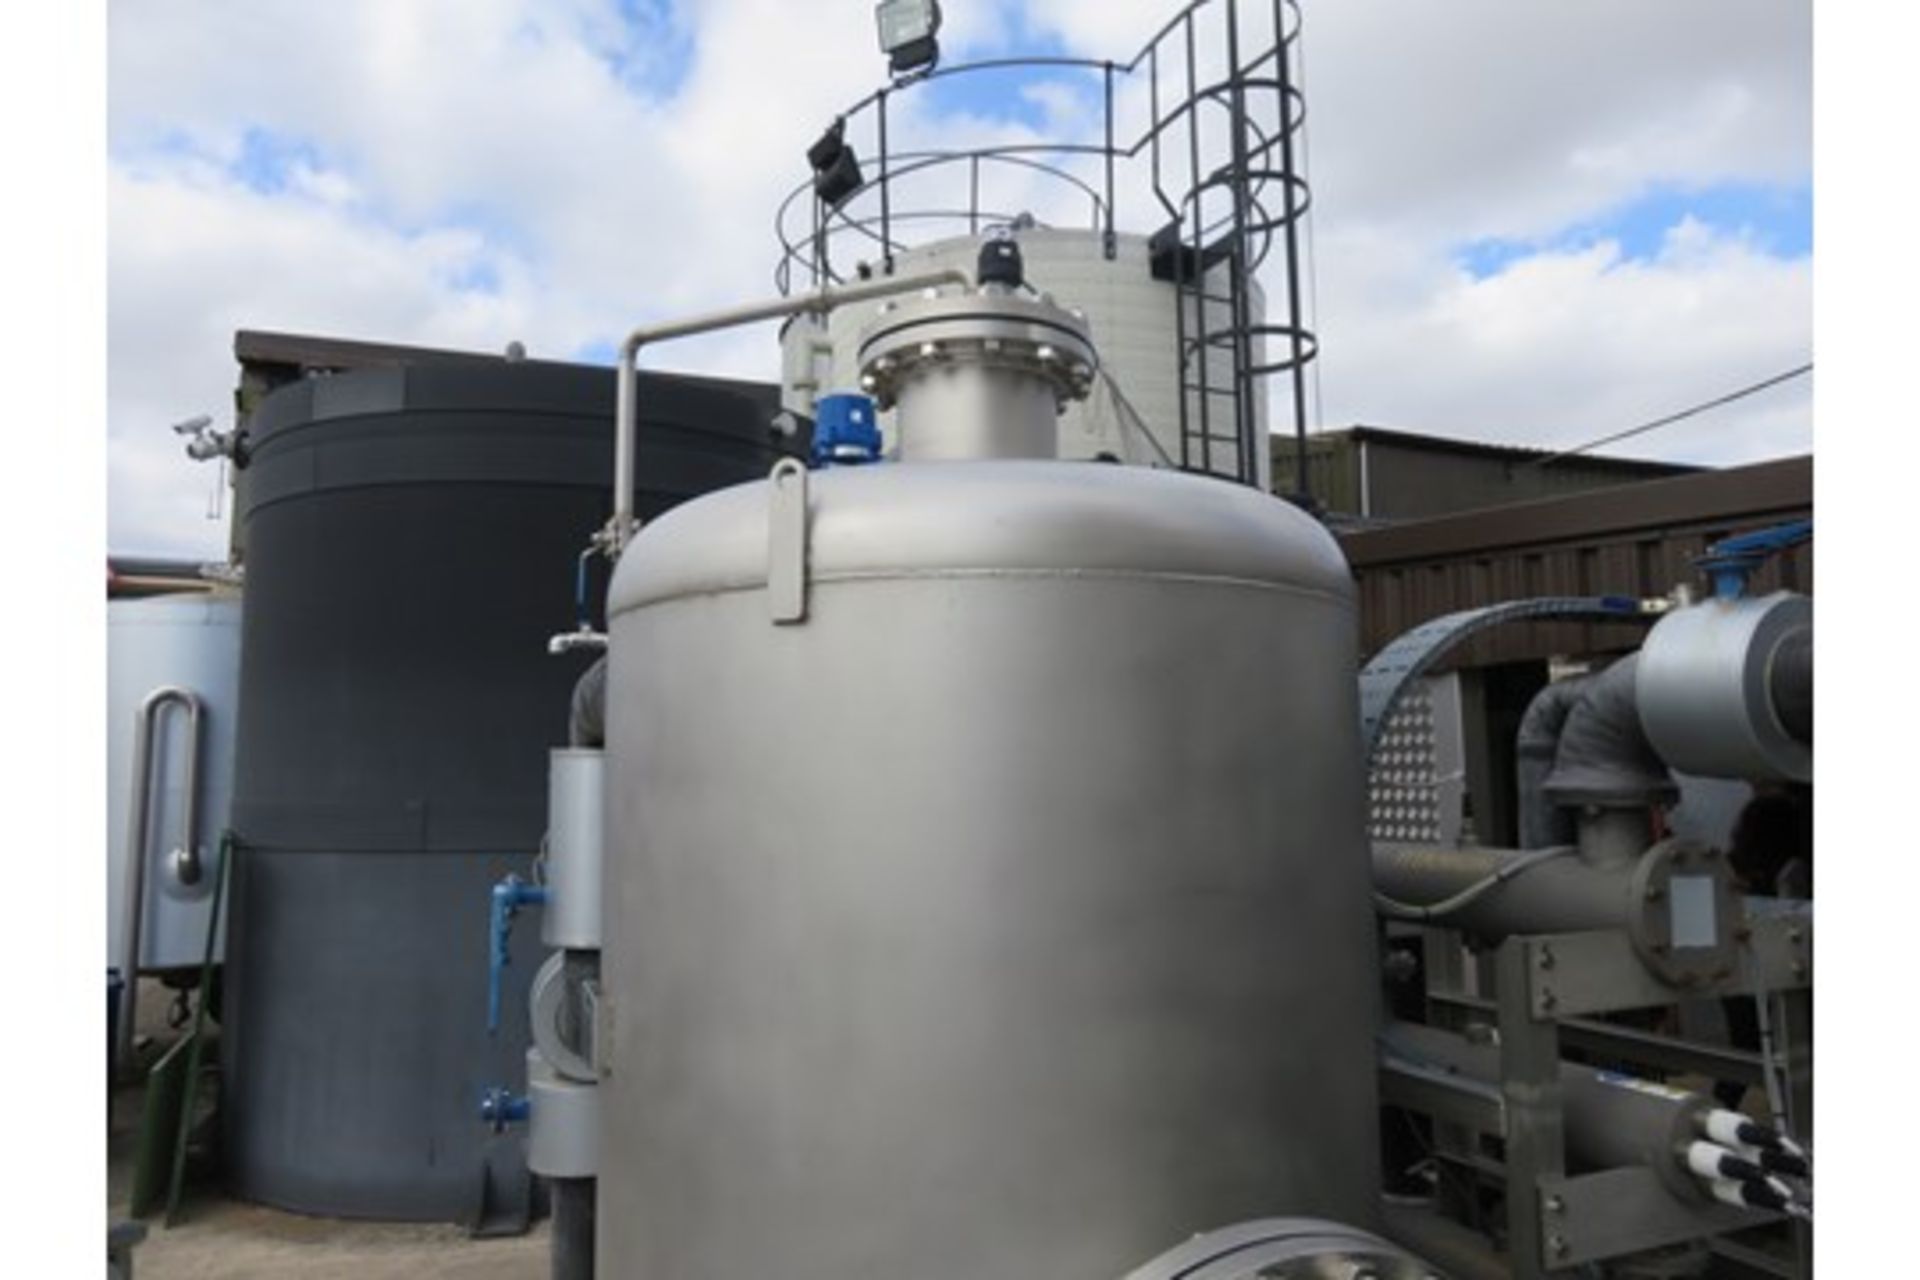 IPS S/s 1,500 litre Year 2015. Lift Out £600